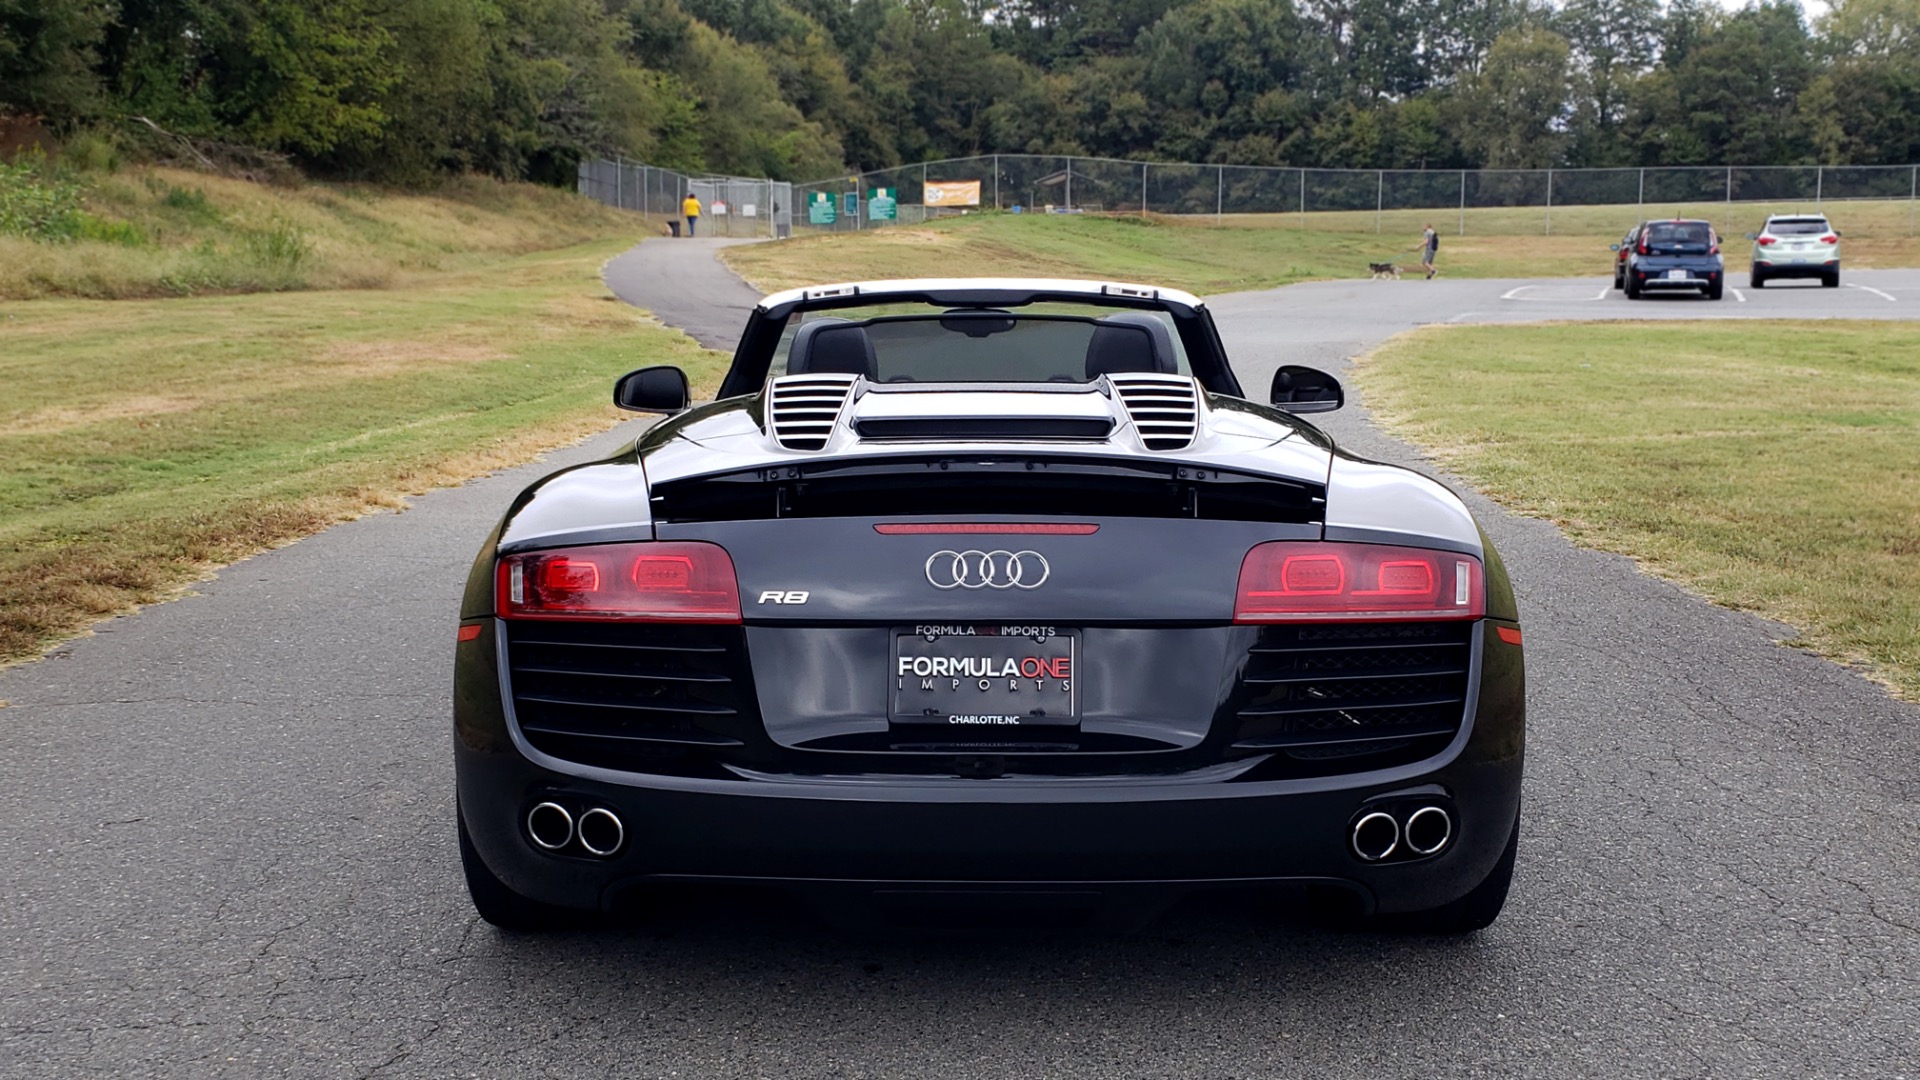 Used 2011 Audi R8 4.2L SPYDER QUATTRO / NAV / 19 IN WHEELS / LOW MILES for sale Sold at Formula Imports in Charlotte NC 28227 30